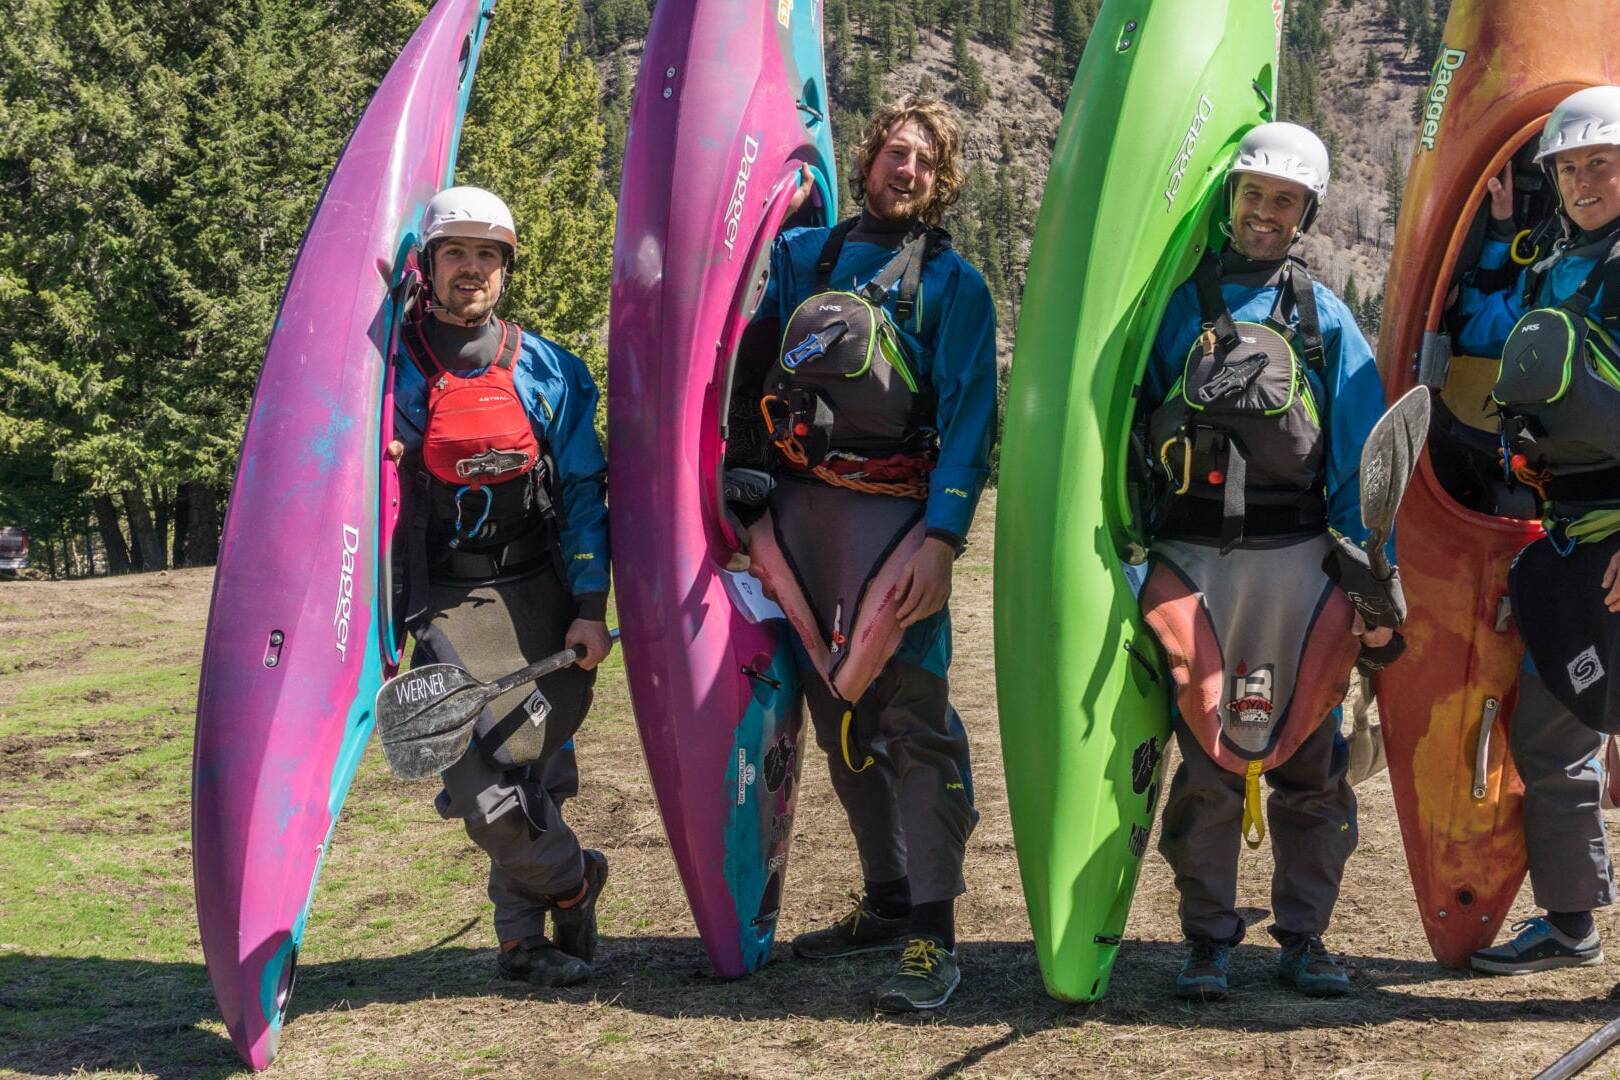 A Beginners Guide to Whitewater Kayaking Gear - Kootenay